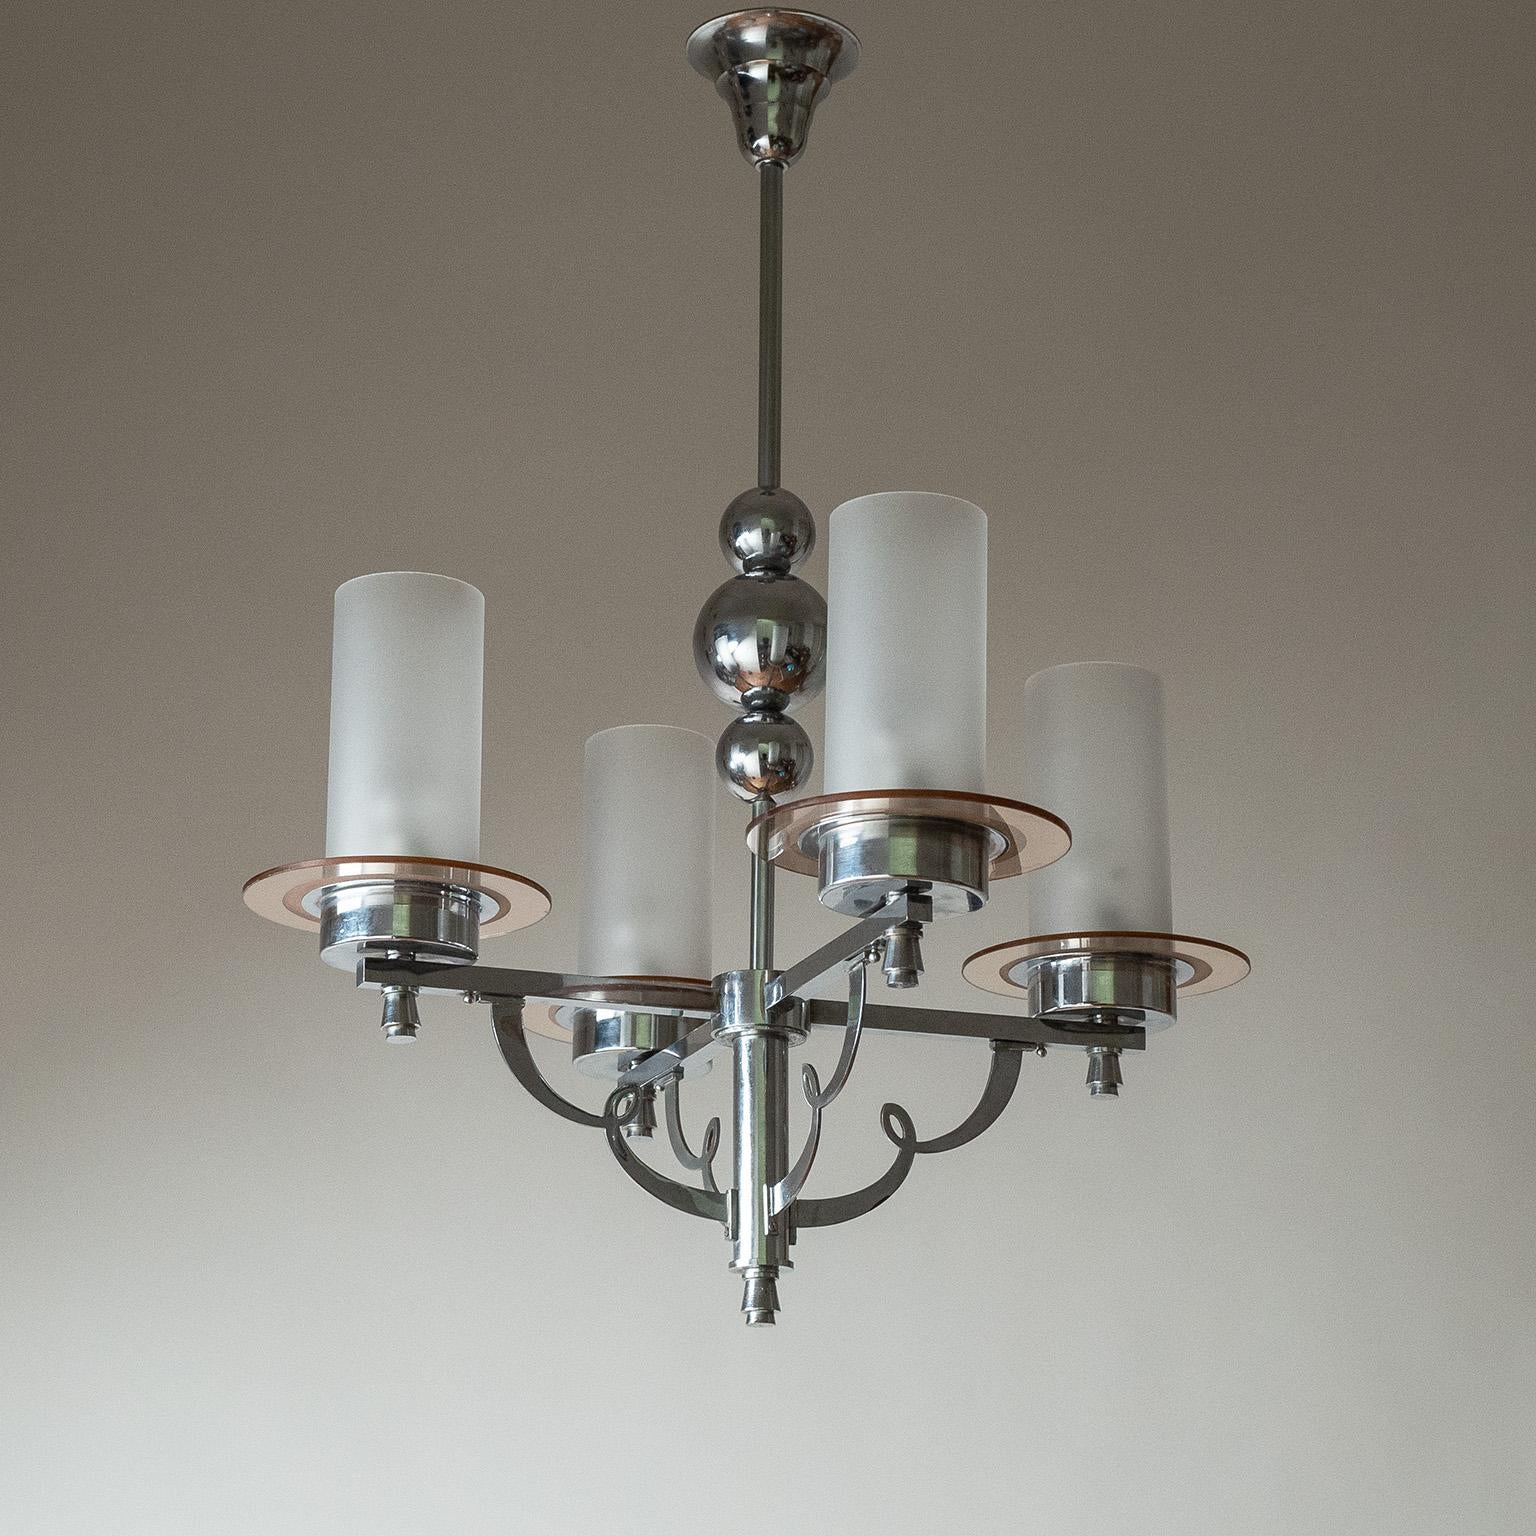 French chrome and glass Art Deco chandelier from the 1930-1940s. Decorative chromed-brass structure with frosted glass tubes and rosé-tinted glass discs. Nice original condition with a minimal patina on the chrome and a small chip on one of the